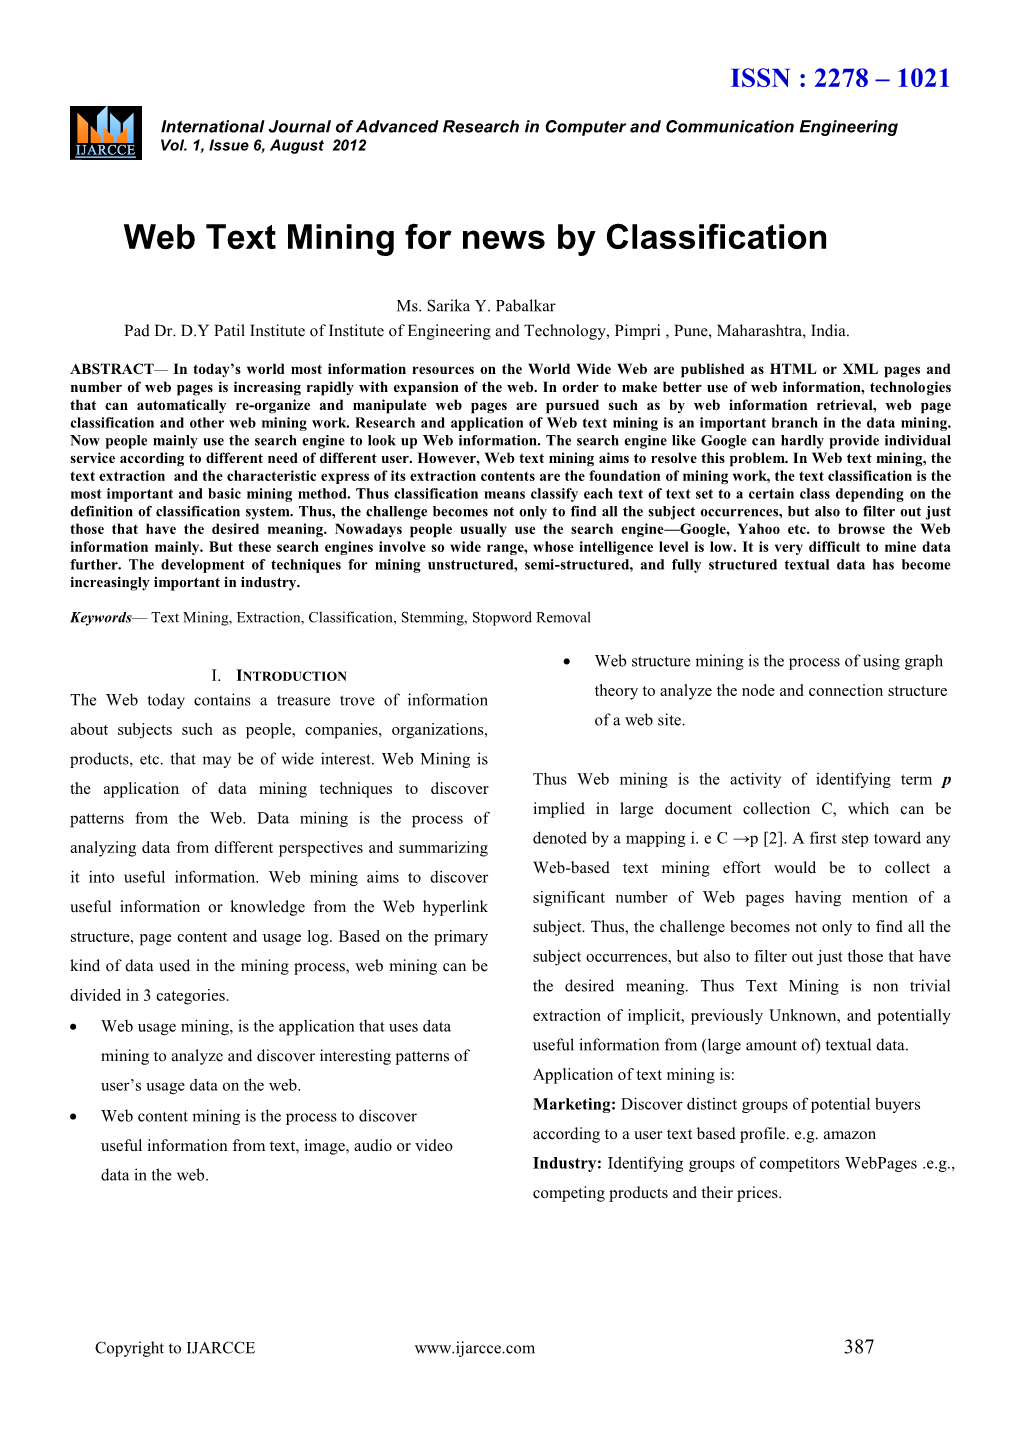 Web Text Mining for News by Classification